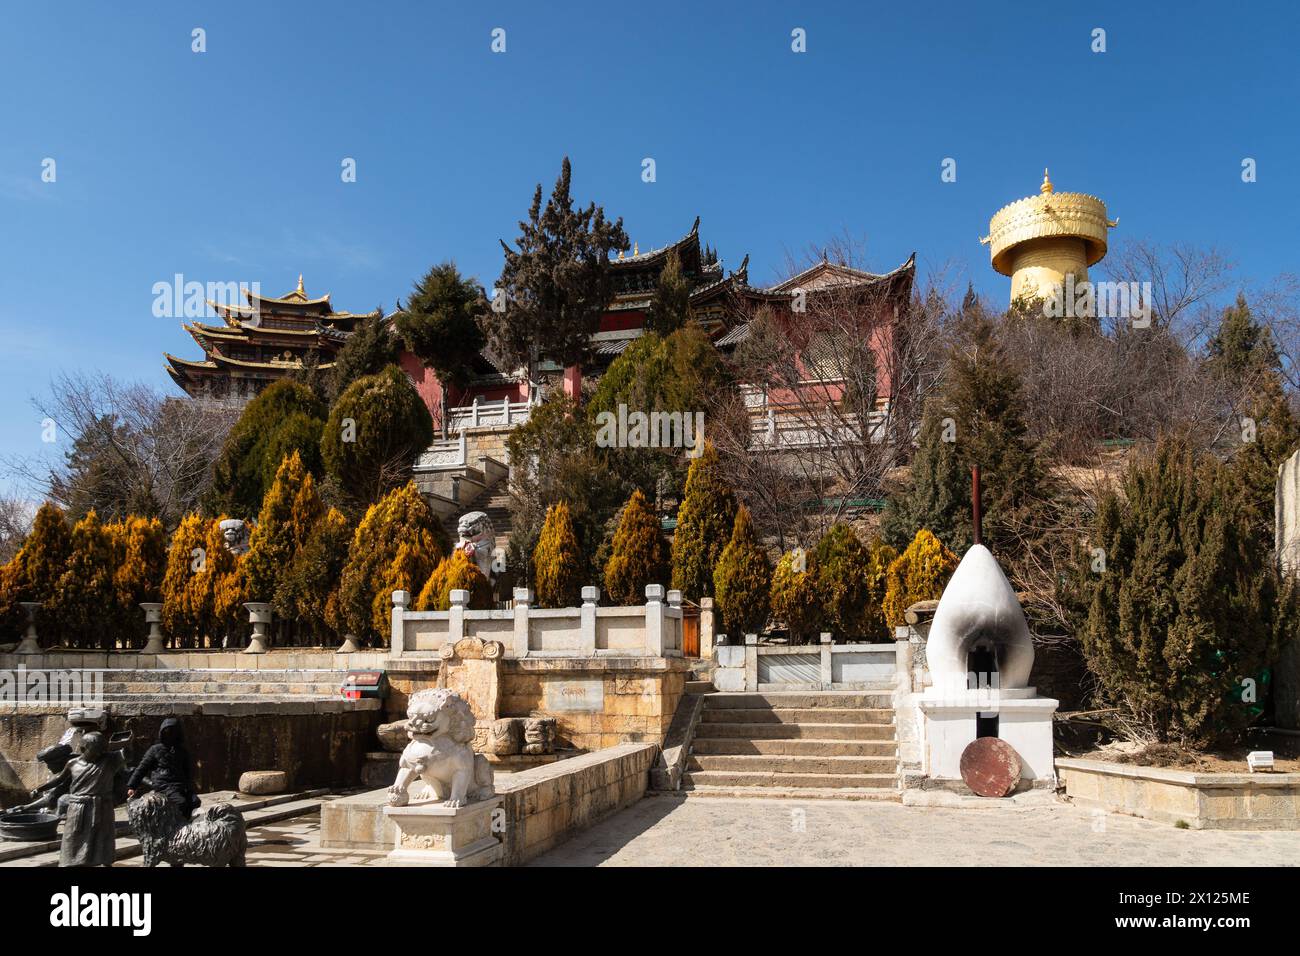 Zhongdian, China: Tibetan Buddhism monastery in the city of Zhongdian in the Himalayas in the Yunnan province on a sunny winter day in China Stock Photo